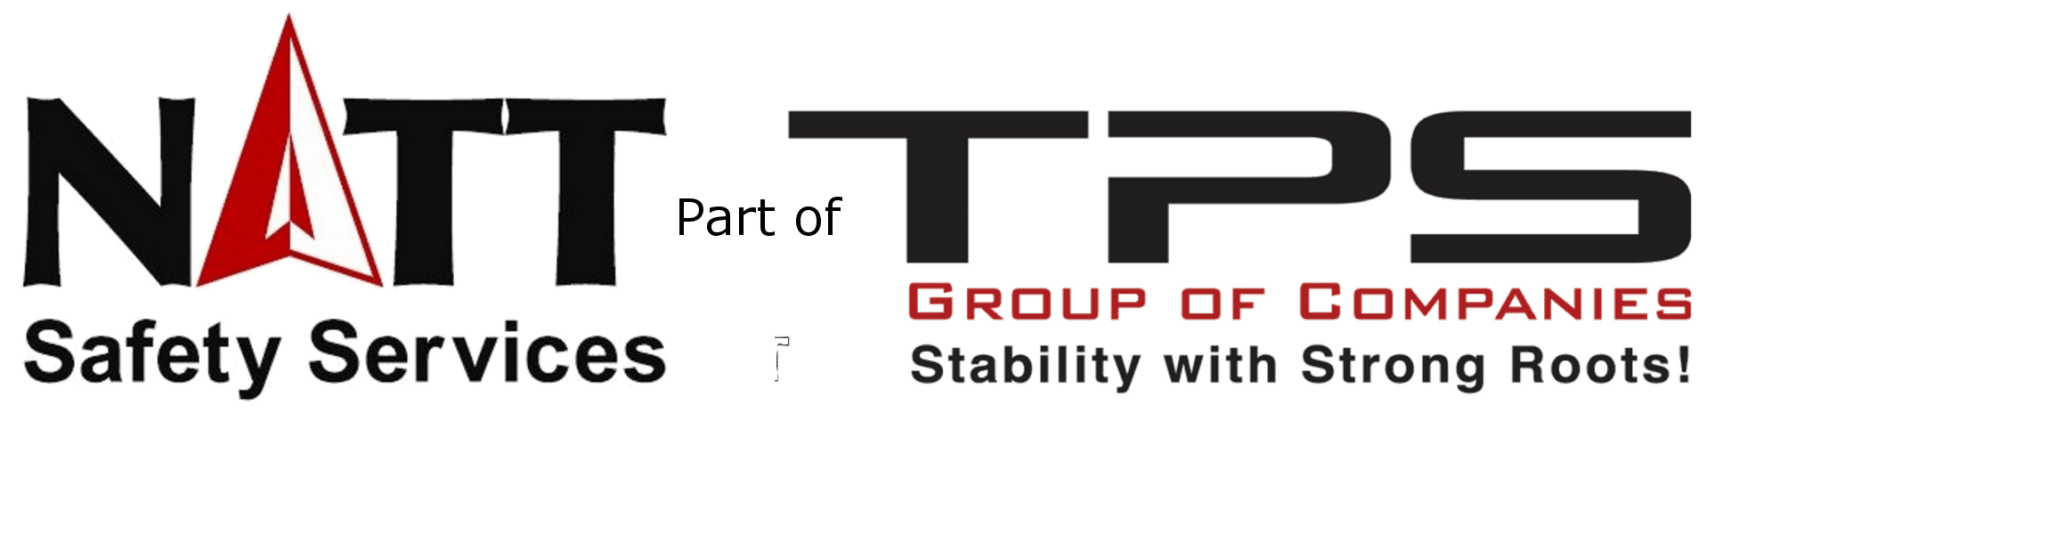 natt safety services part of tps group of companies